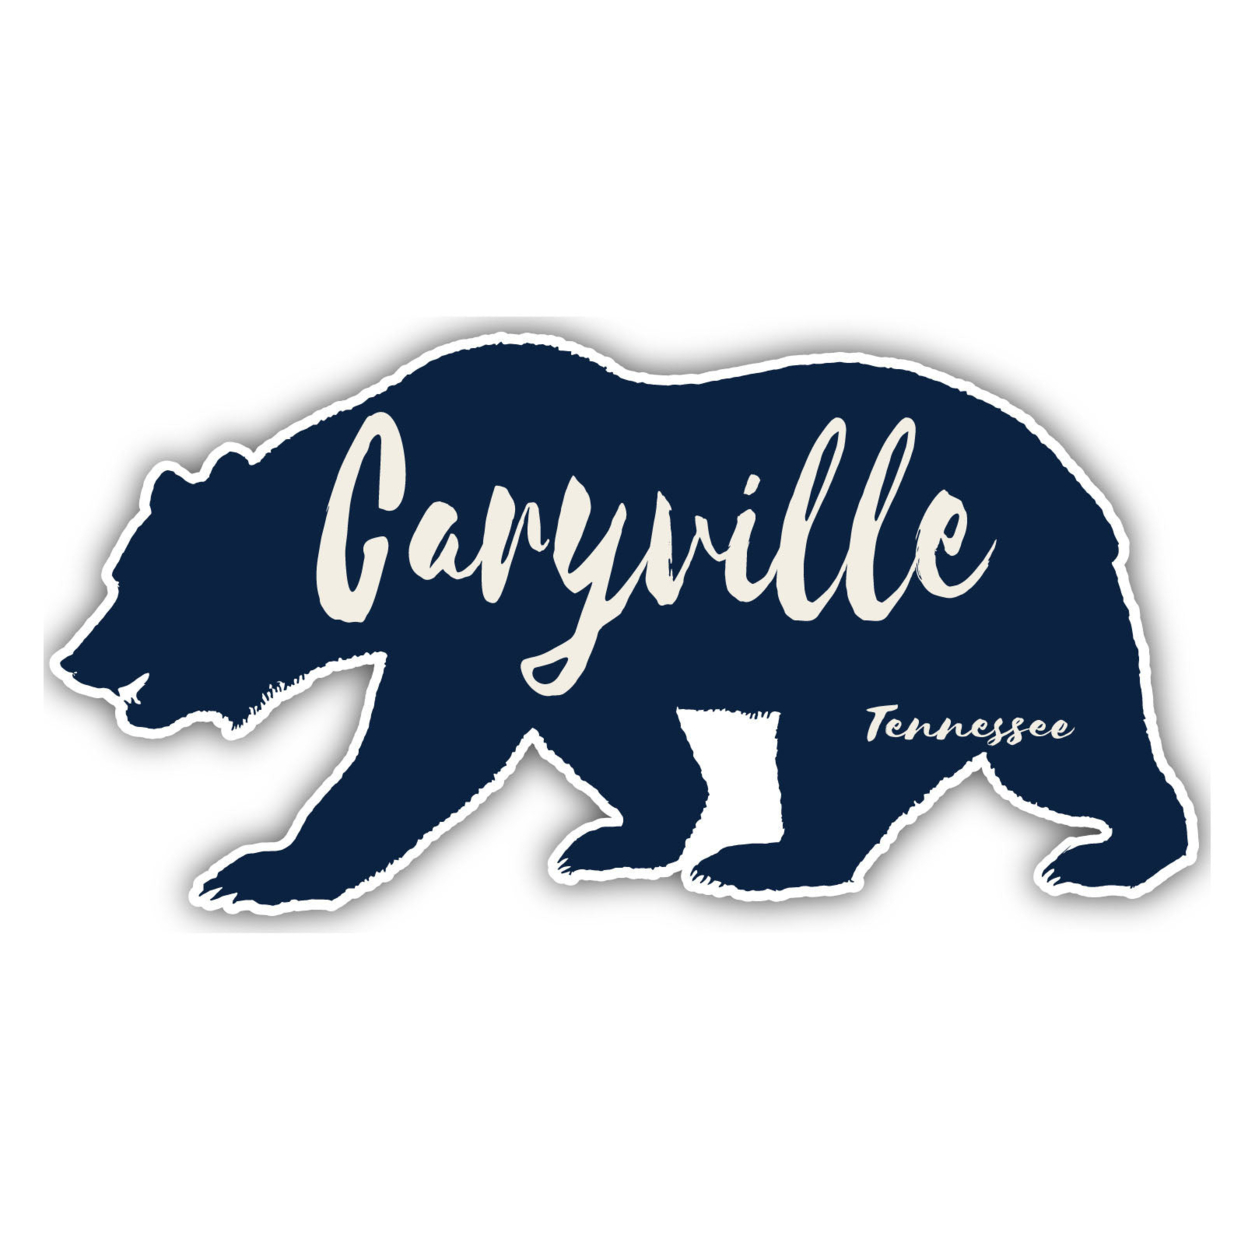 Caryville Tennessee Souvenir Decorative Stickers (Choose Theme And Size) - 4-Pack, 12-Inch, Bear